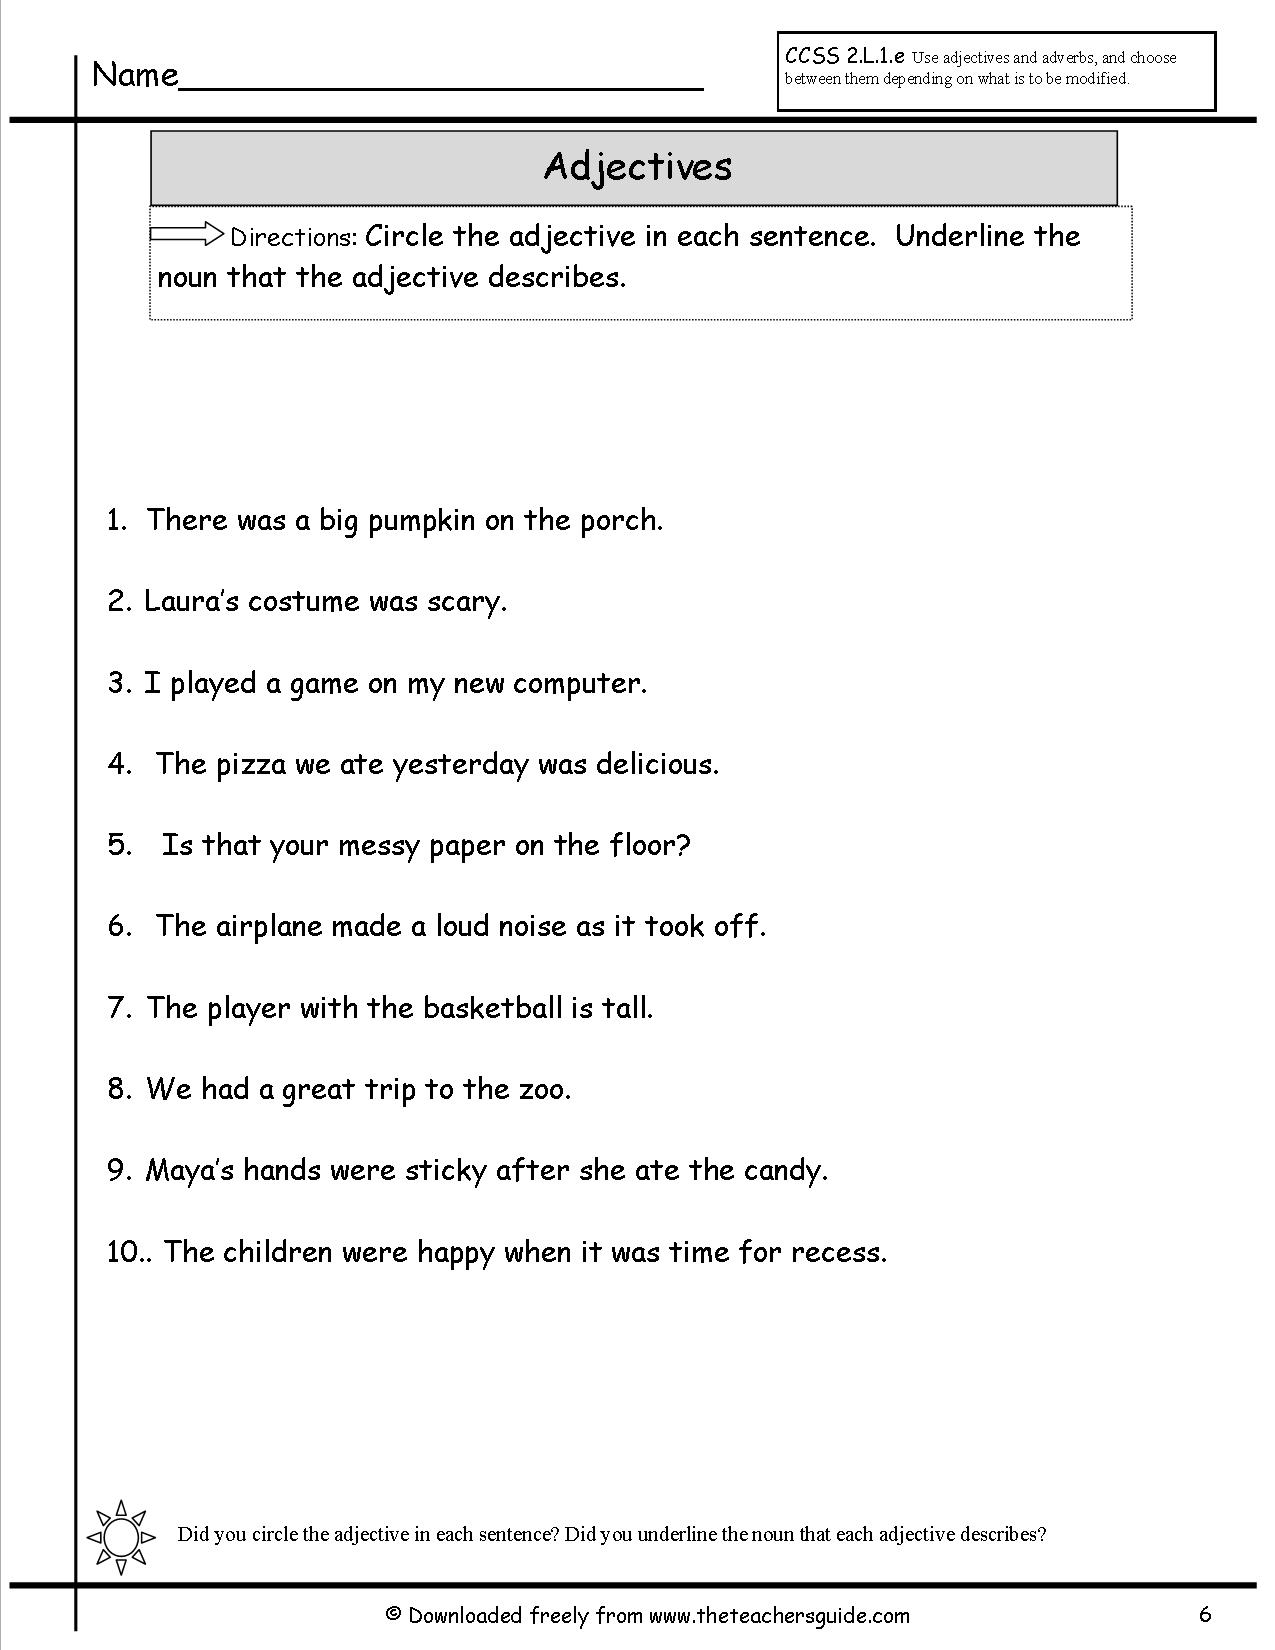 15-best-images-of-nouns-and-adjectives-worksheets-identifying-nouns